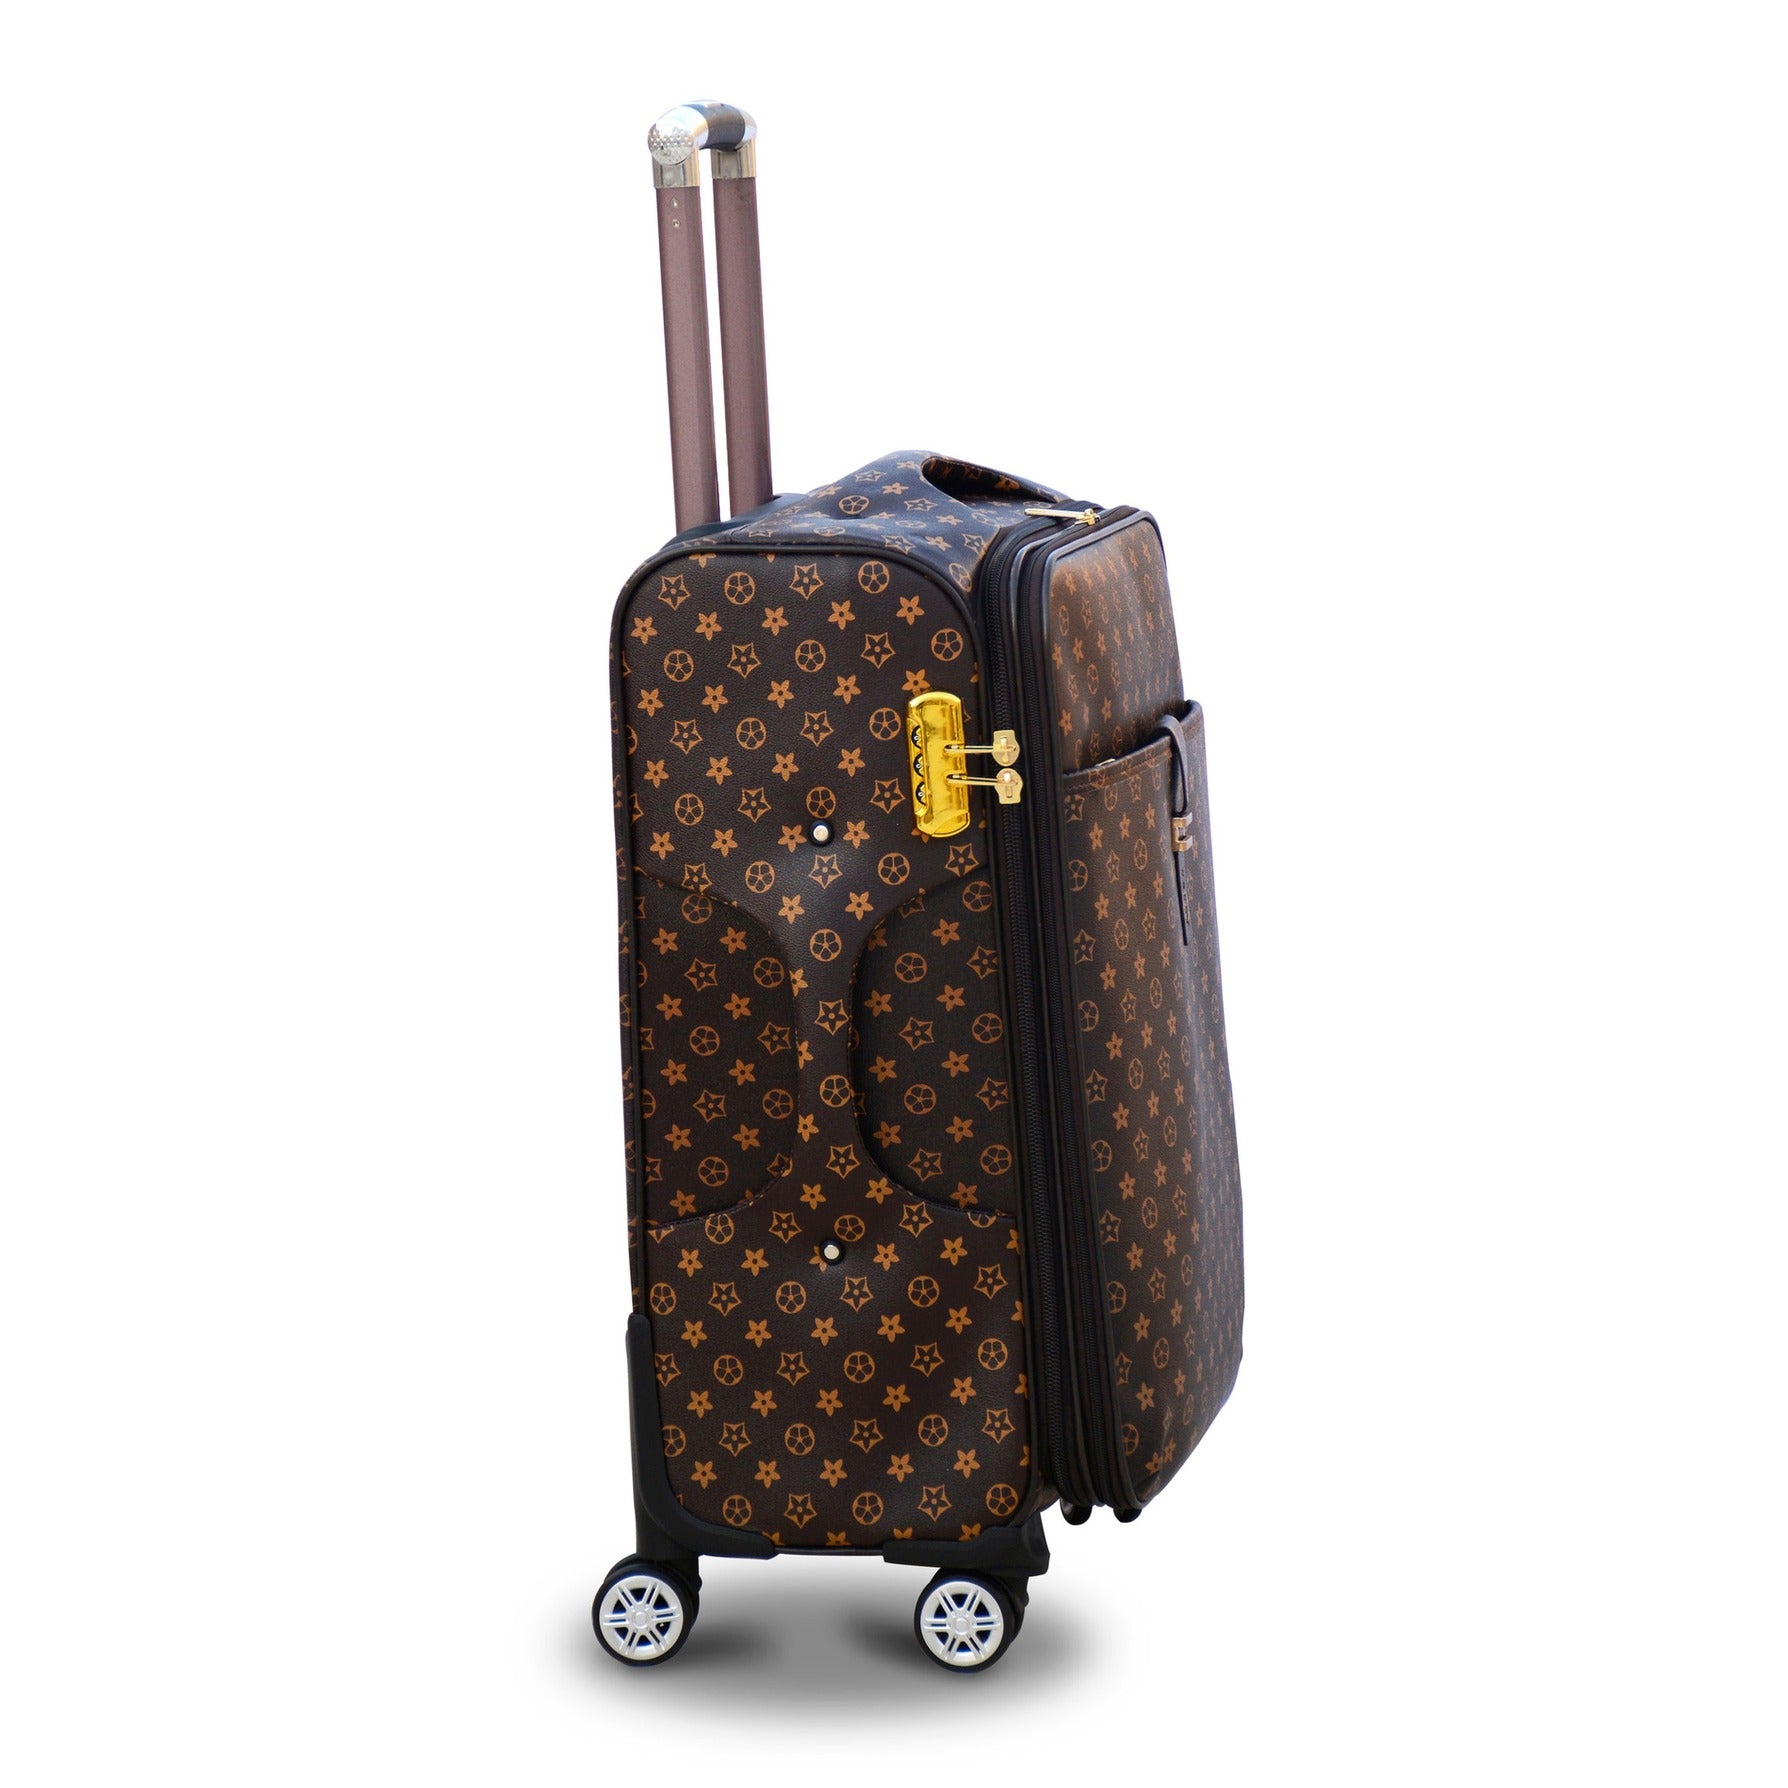 28" Brown Colour LVR PU Leather Luggage Lightweight Trolley Bag with Spinner Wheel